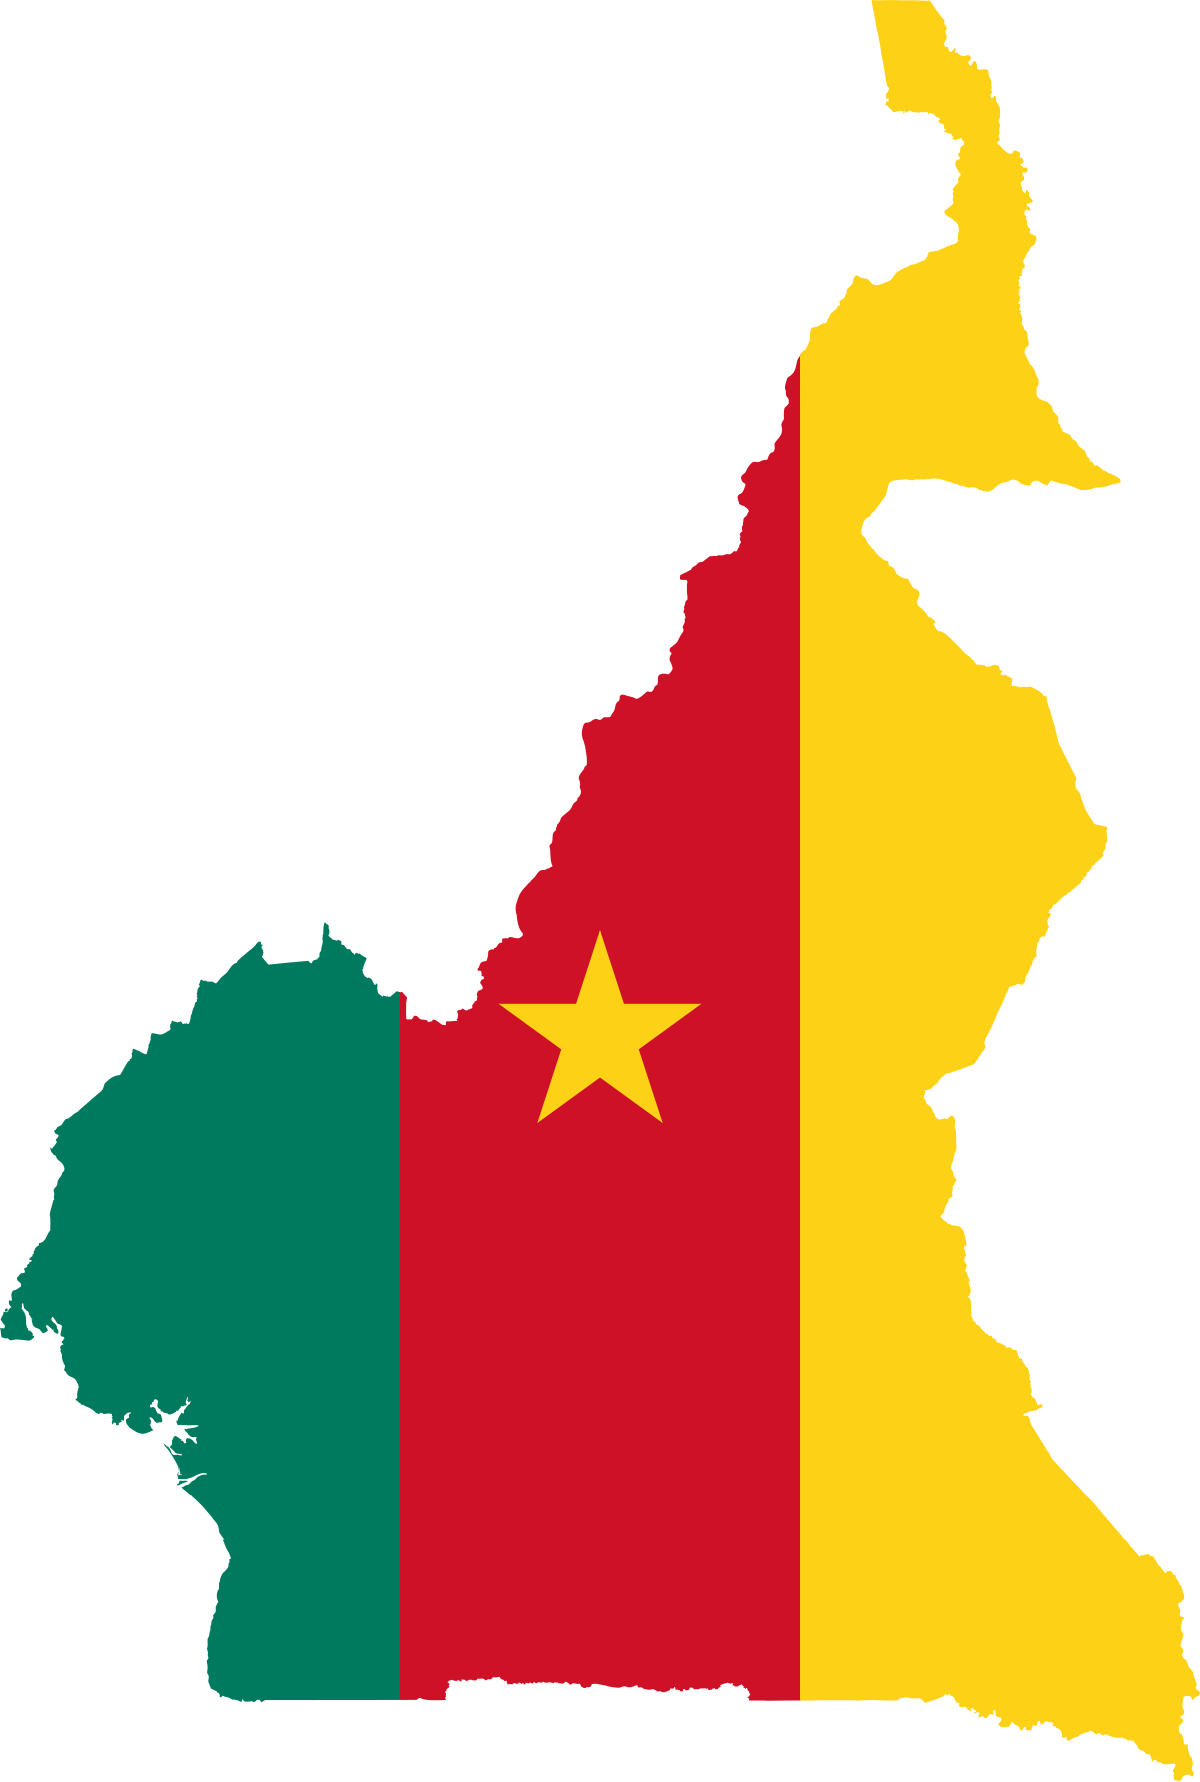 Immigrants in Cameroon